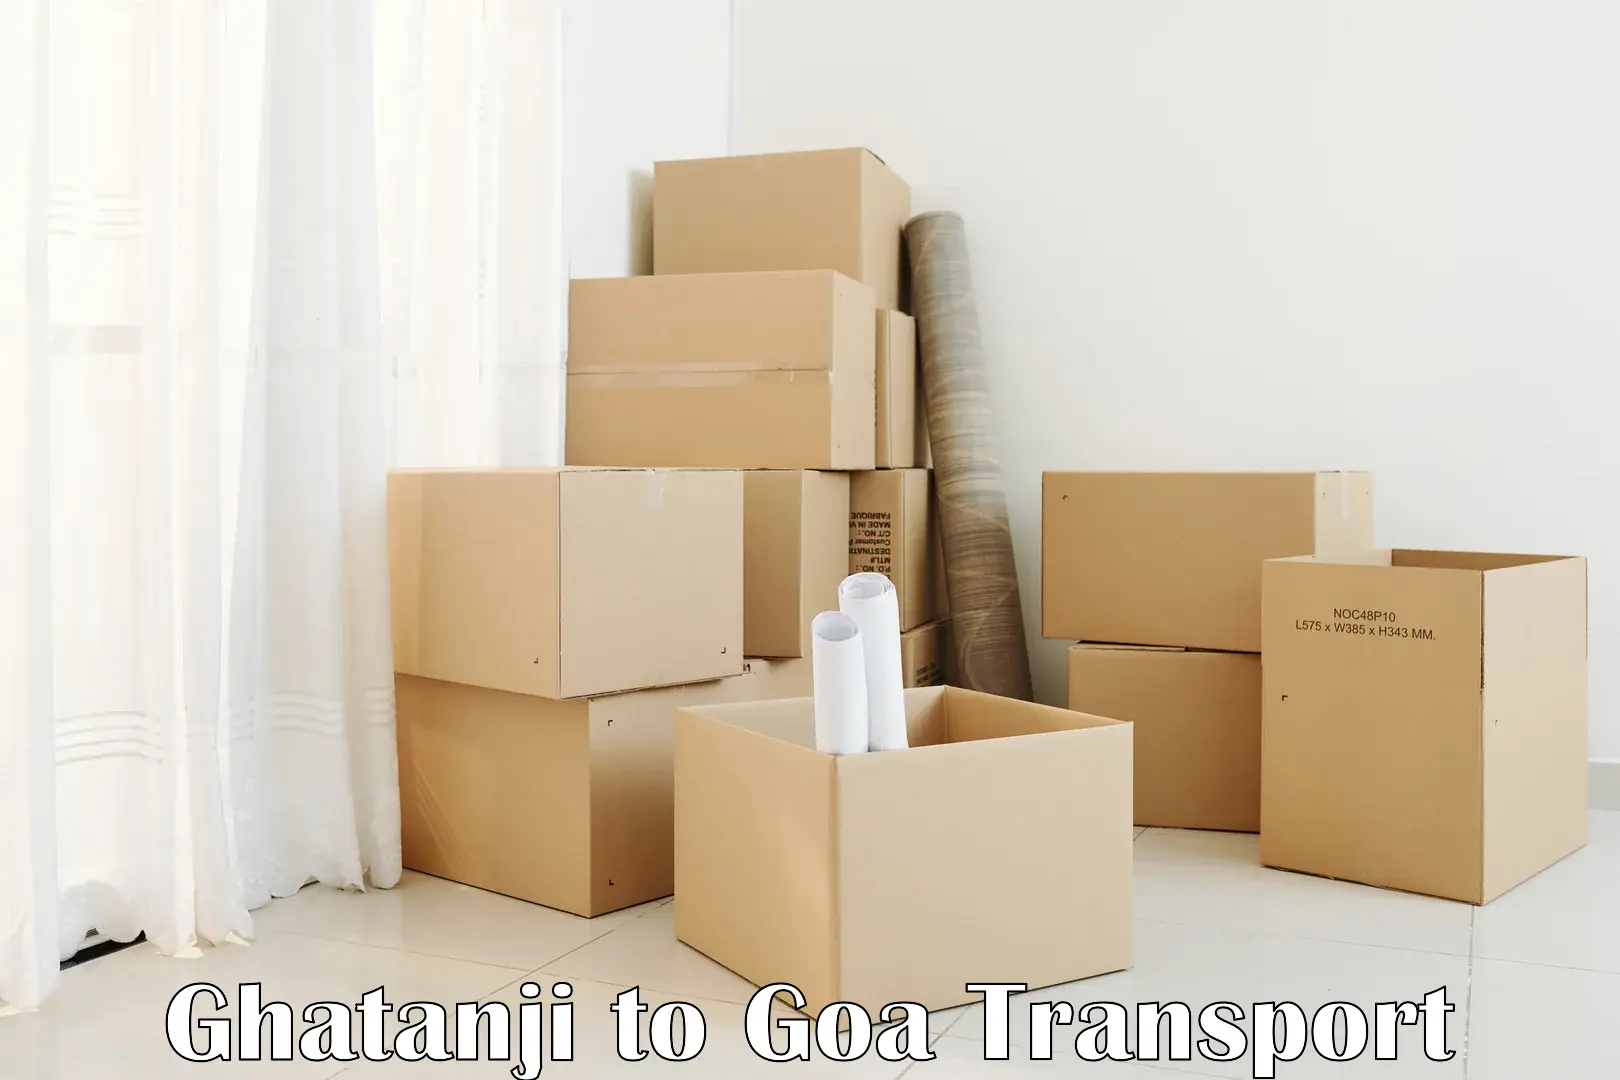 Road transport online services Ghatanji to Goa